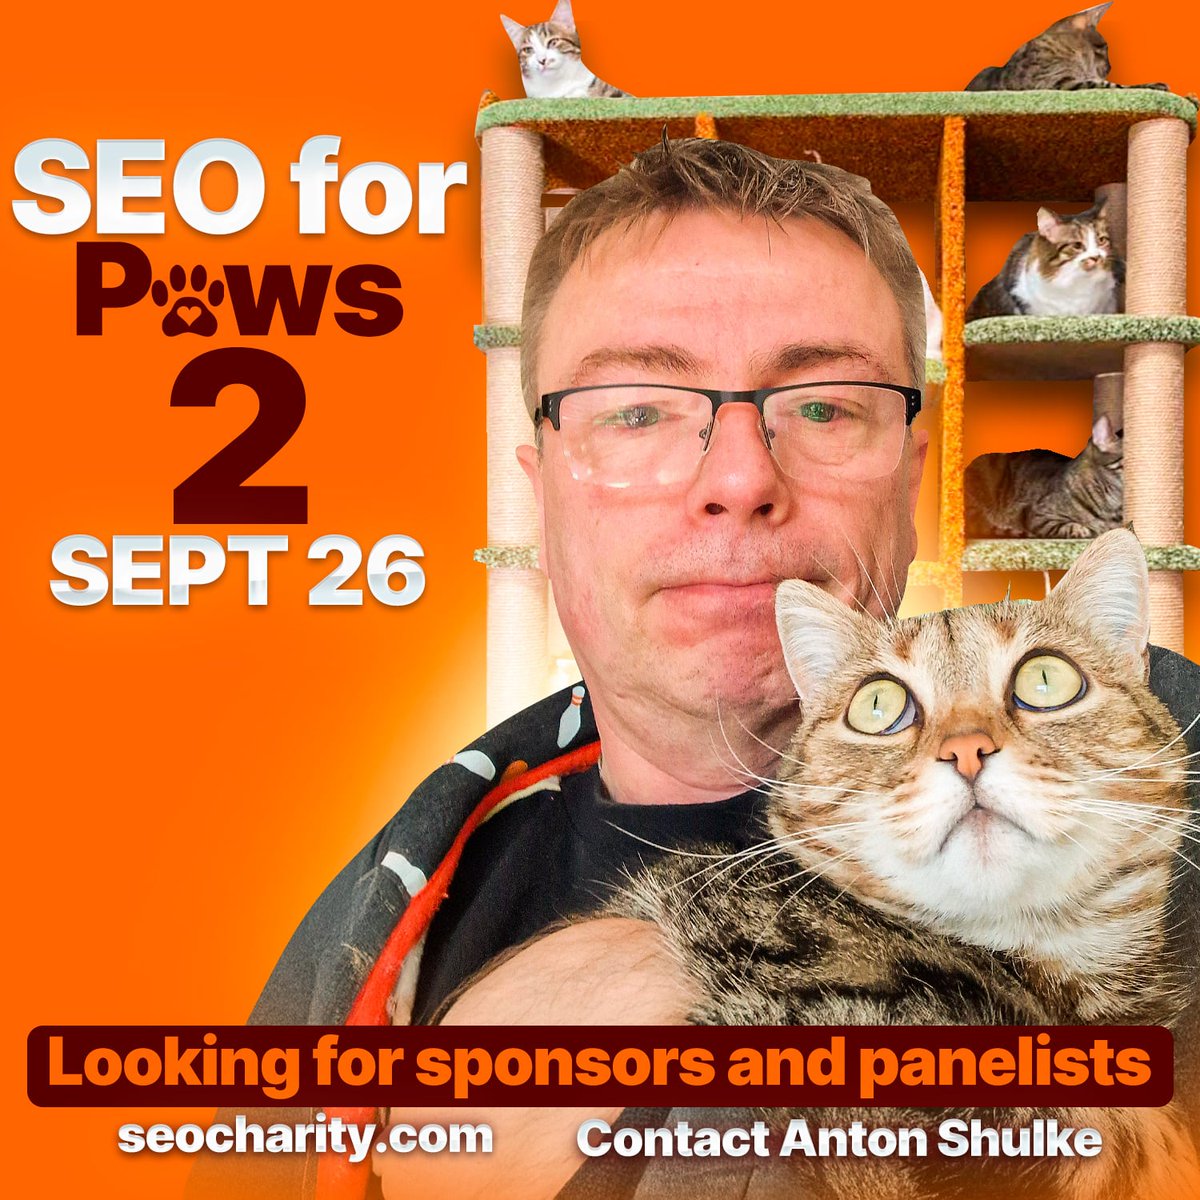 SEO for Paws 2, on SEP26 We are looking for speakers, panelists and sponsors and it is #seocharity event, we managed to collect more than $6,000 on the first one *sponsors money and donations during the livestream